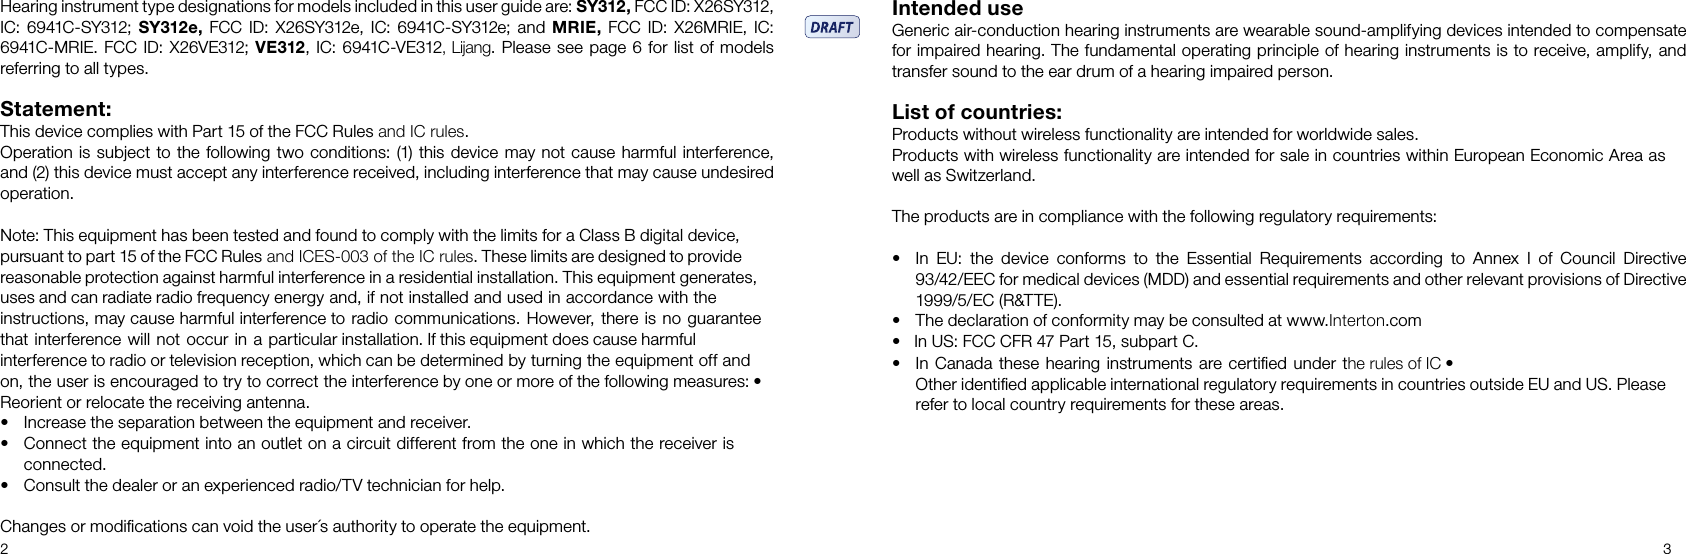 2 3Hearing instrument type designations for models included in this user guide are: SY312, FCC ID: X26SY312, IC: 6941C-SY312; SY312e, FCC ID: X26SY312e, IC: 6941C-SY312e; and MRIE, FCC ID: X26MRIE, IC: 6941C-MRIE. FCC ID: X26VE312; VE312, IC: 6941C-VE312, Lijang. Please see page 6 for list of models referring to all types.Statement:This device complies with Part 15 of the FCC Rules and IC rules.Operation is subject to the following two conditions: (1) this device may not cause harmful inter ference, and (2) this device must accept any interference received, including interference that may cause undesired operation.Note: This equipment has been tested and found to comply with the limits for a Class B digital device, pursuant to part 15 of the FCC Rules and ICES-003 of the IC rules. These limits are designed to provide reasonable protection against harmful interference in a residential installation. This equipment generates, uses and can radiate radio frequency energy and, if not installed and used in accordance with the instructions, may cause harmful interference to radio communications. However, there is no guarantee that interference will not occur in a particular installation. If this equipment does cause harmful interference to radio or television reception, which can be determined by turning the equipment off and on, the user is encouraged to try to correct the interference by one or more of the following measures: • Reorient or relocate the receiving antenna.• Increase the separation between the equipment and receiver.• Connect the equipment into an outlet on a circuit different from the one in which the receiver is connected.• Consult the dealer or an experienced radio/TV technician for help.Changes or modiﬁcations can void the user´s authority to operate the equipment.Intended use Generic air-conduction hearing instruments are wearable sound-amplifying devices intended to compensate for impaired hearing. The fundamental operating principle of hearing instruments is to receive, amplify, and transfer sound to the ear drum of a hearing impaired person. List of countries: Products without wireless functionality are intended for worldwide sales.Products with wireless functionality are intended for sale in countries within European Economic Area as well as Switzerland.The products are in compliance with the following regulatory requirements: • In  EU:  the  device  conforms  to  the  Essential  Requirements  according  to  Annex  I  of  Council  Directive 93/42/EEC for medical devices (MDD) and essential requirements and other relevant provisions of Directive 1999/5/EC (R&amp;TTE). • The declaration of conformity may be consulted at www.Interton.com•   In US: FCC CFR 47 Part 15, subpart C.• In Canada these hearing instruments are certiﬁed under the rules of IC •Other identiﬁed applicable international regulatory requirements in countries outside EU and US. Please refer to local country requirements for these areas.